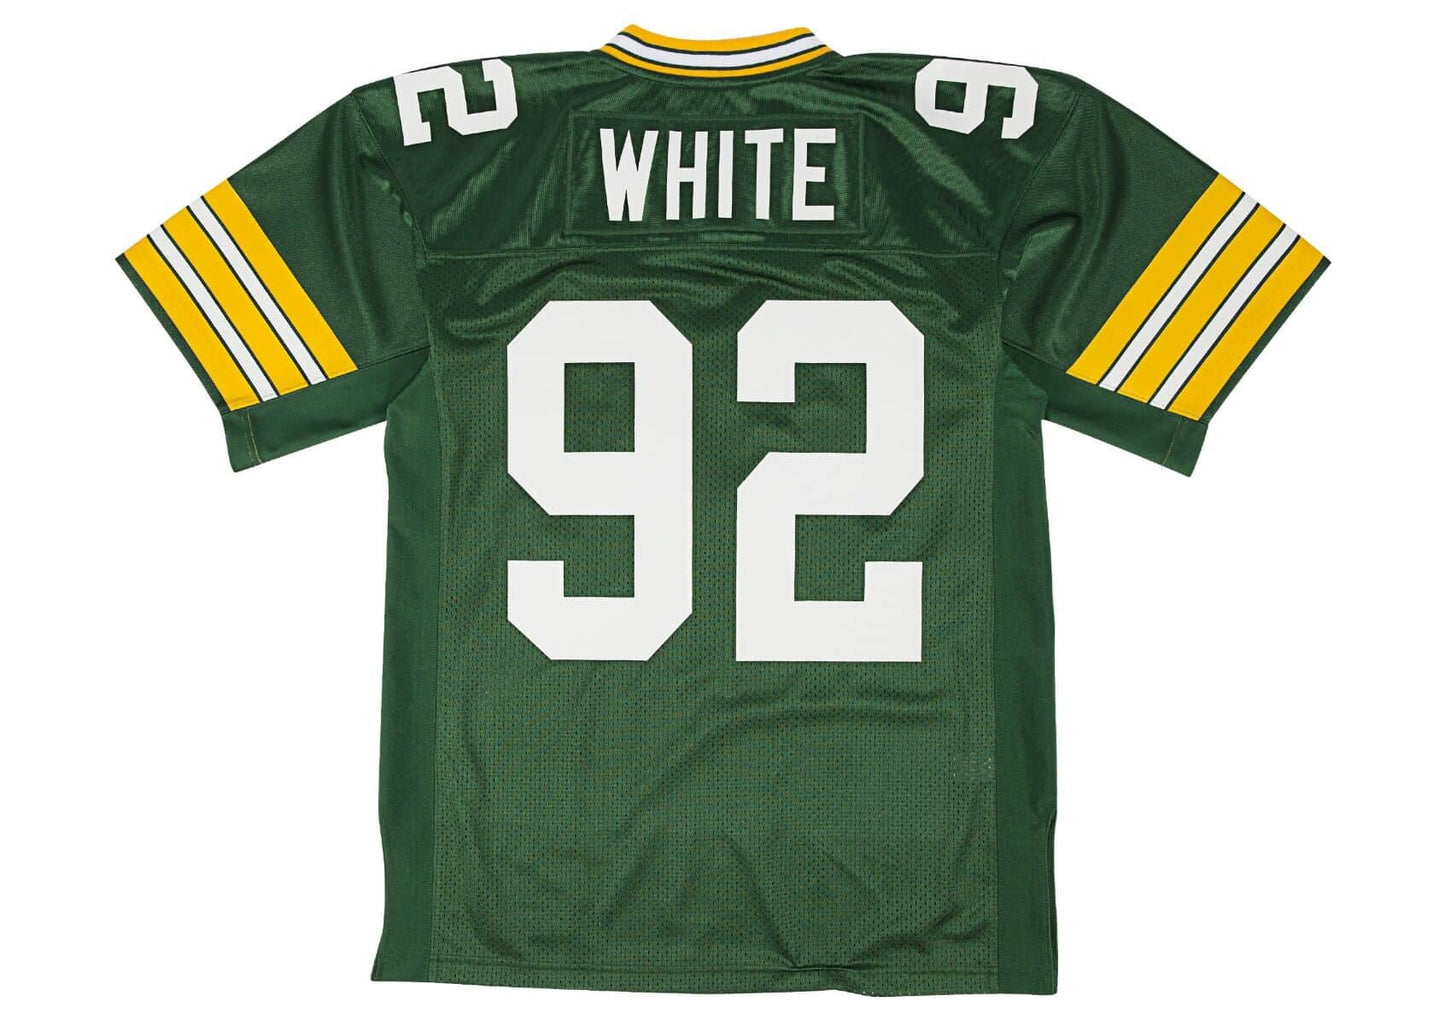 Authentic Jersey Green Bay Packers 1993 Reggie White #92 - Broski Clothing